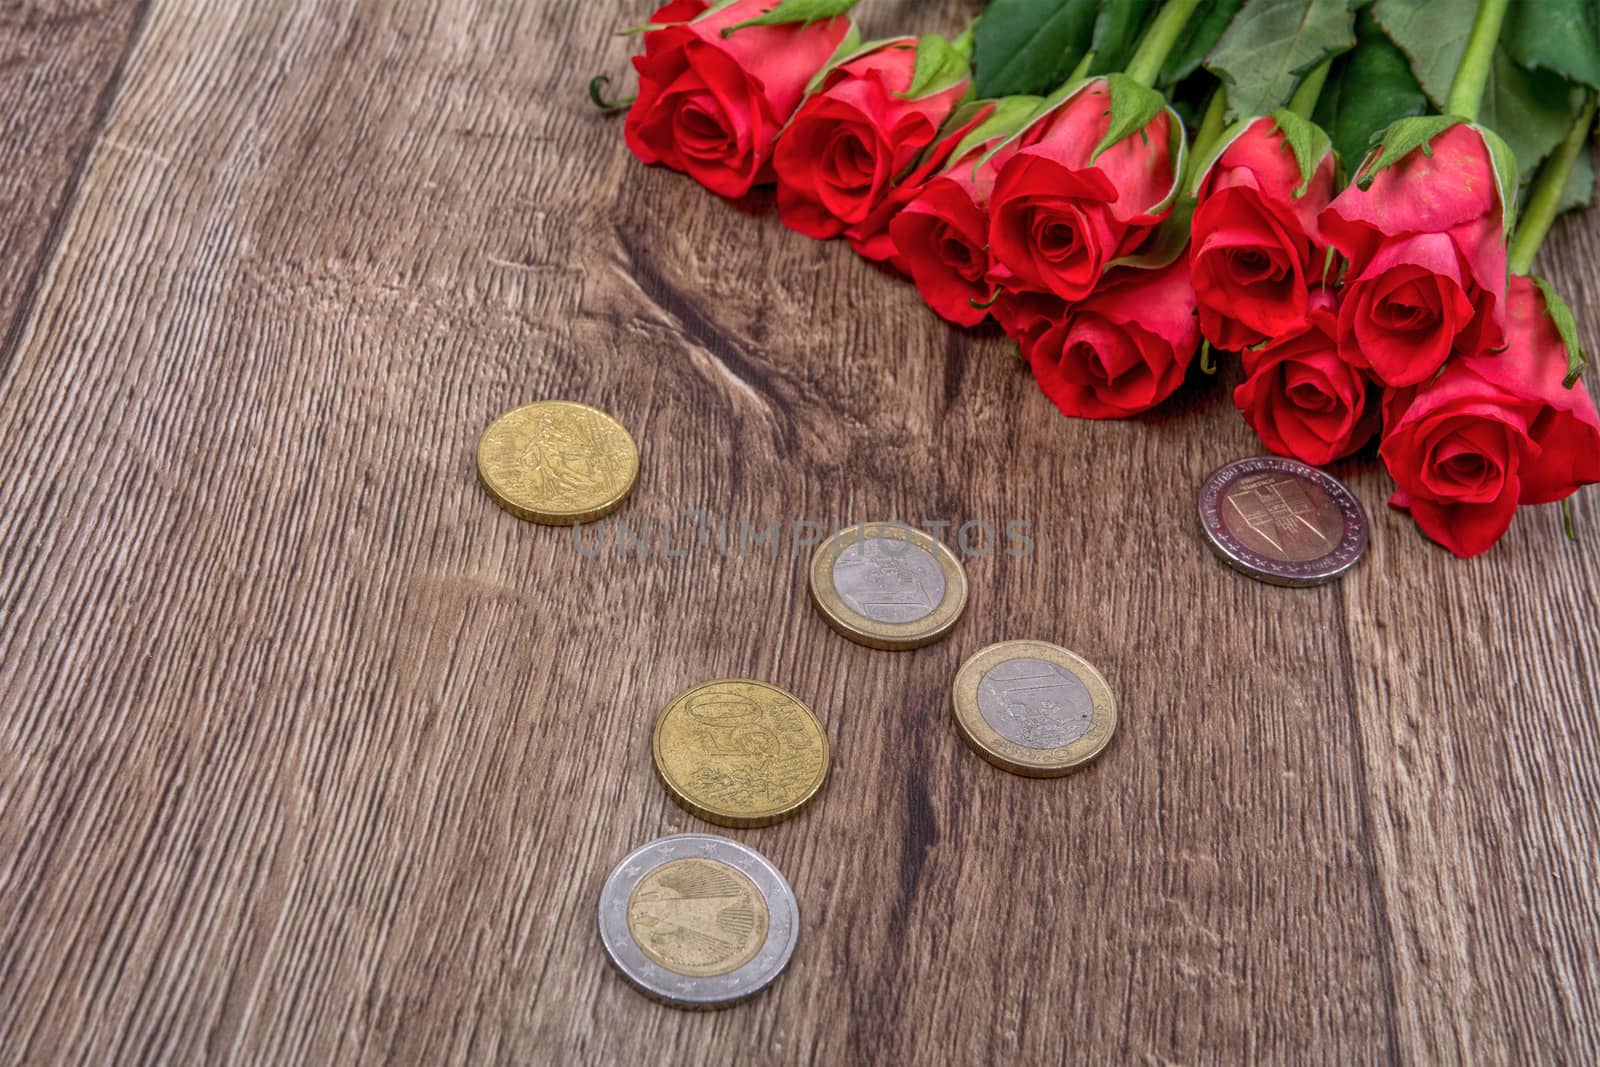 Euro coins and red roses on a wooden background